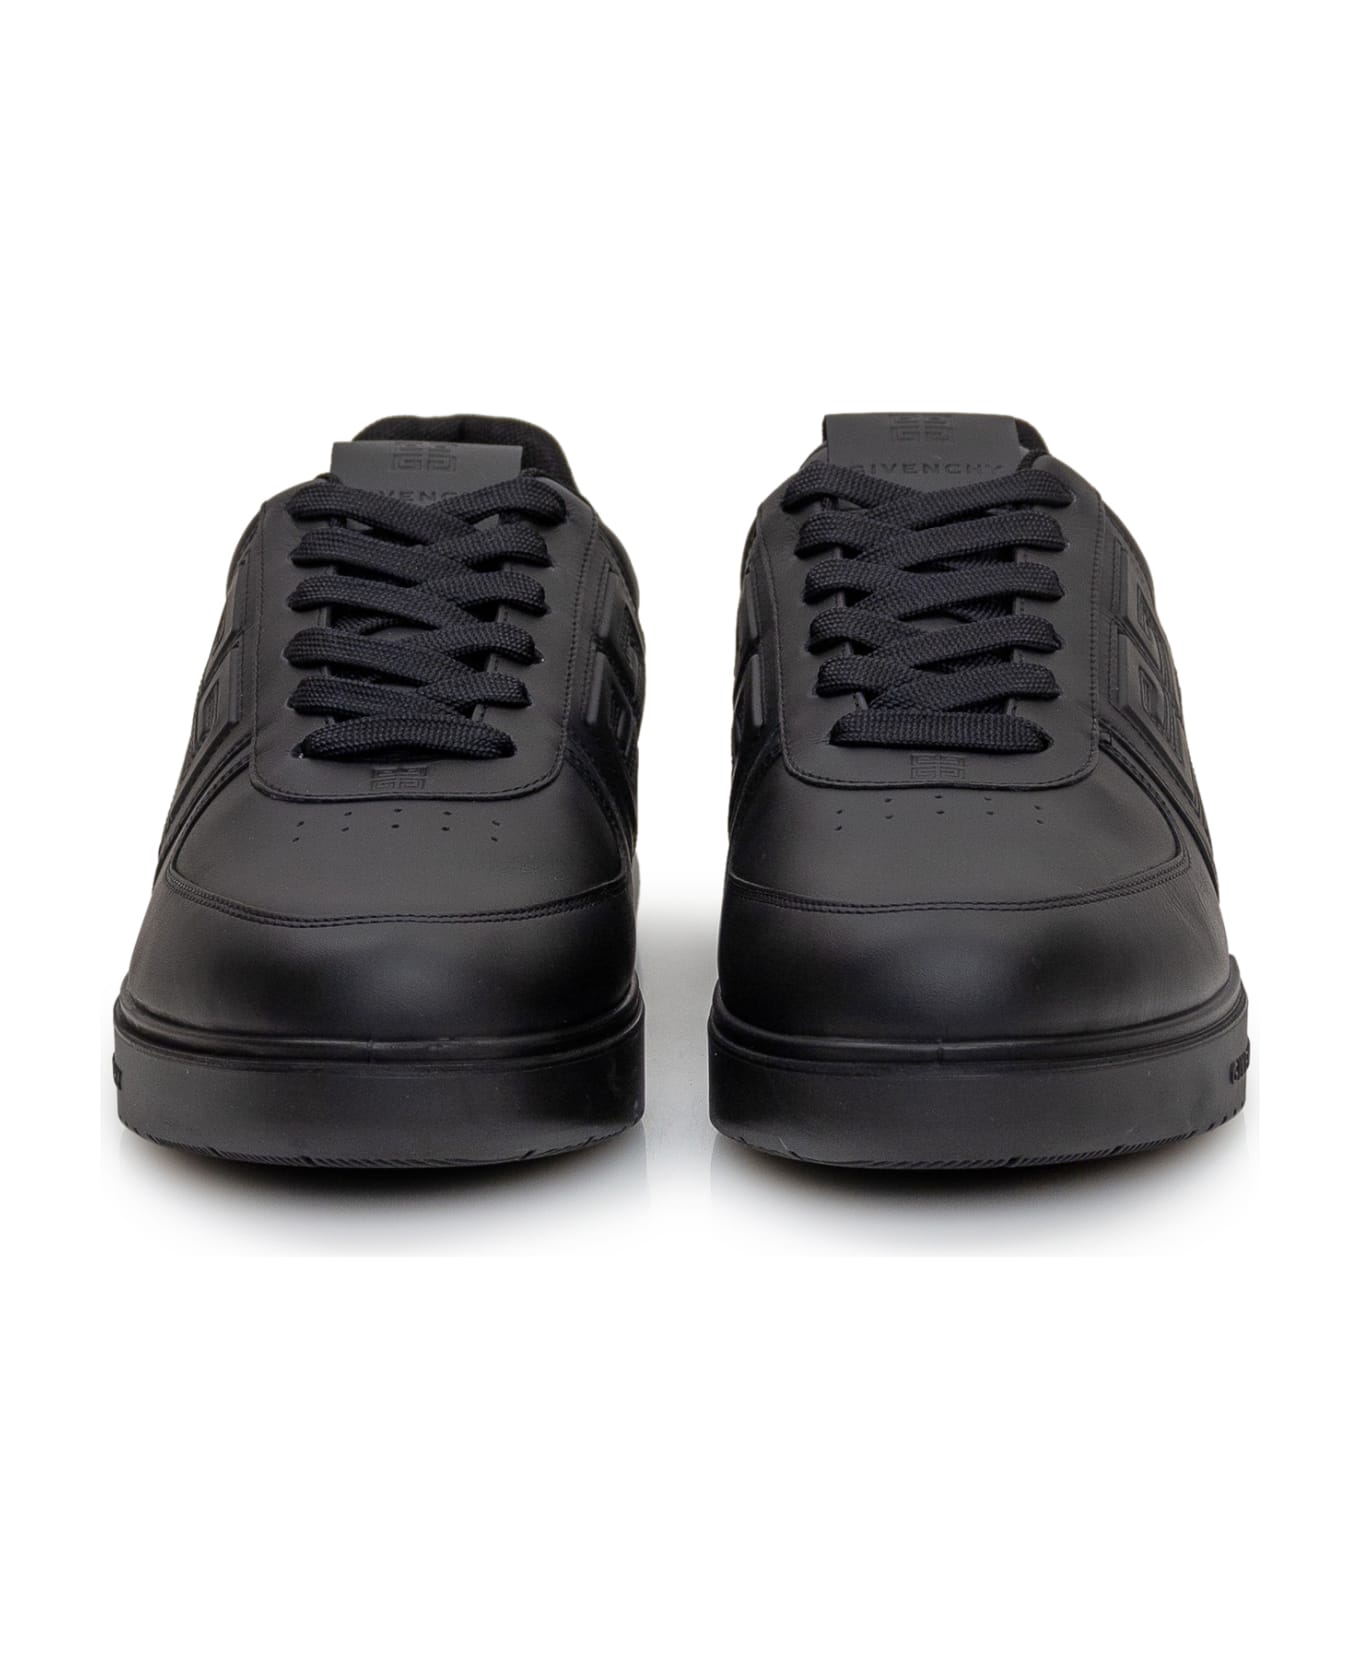 Givenchy G4 Low Sneakers - Black